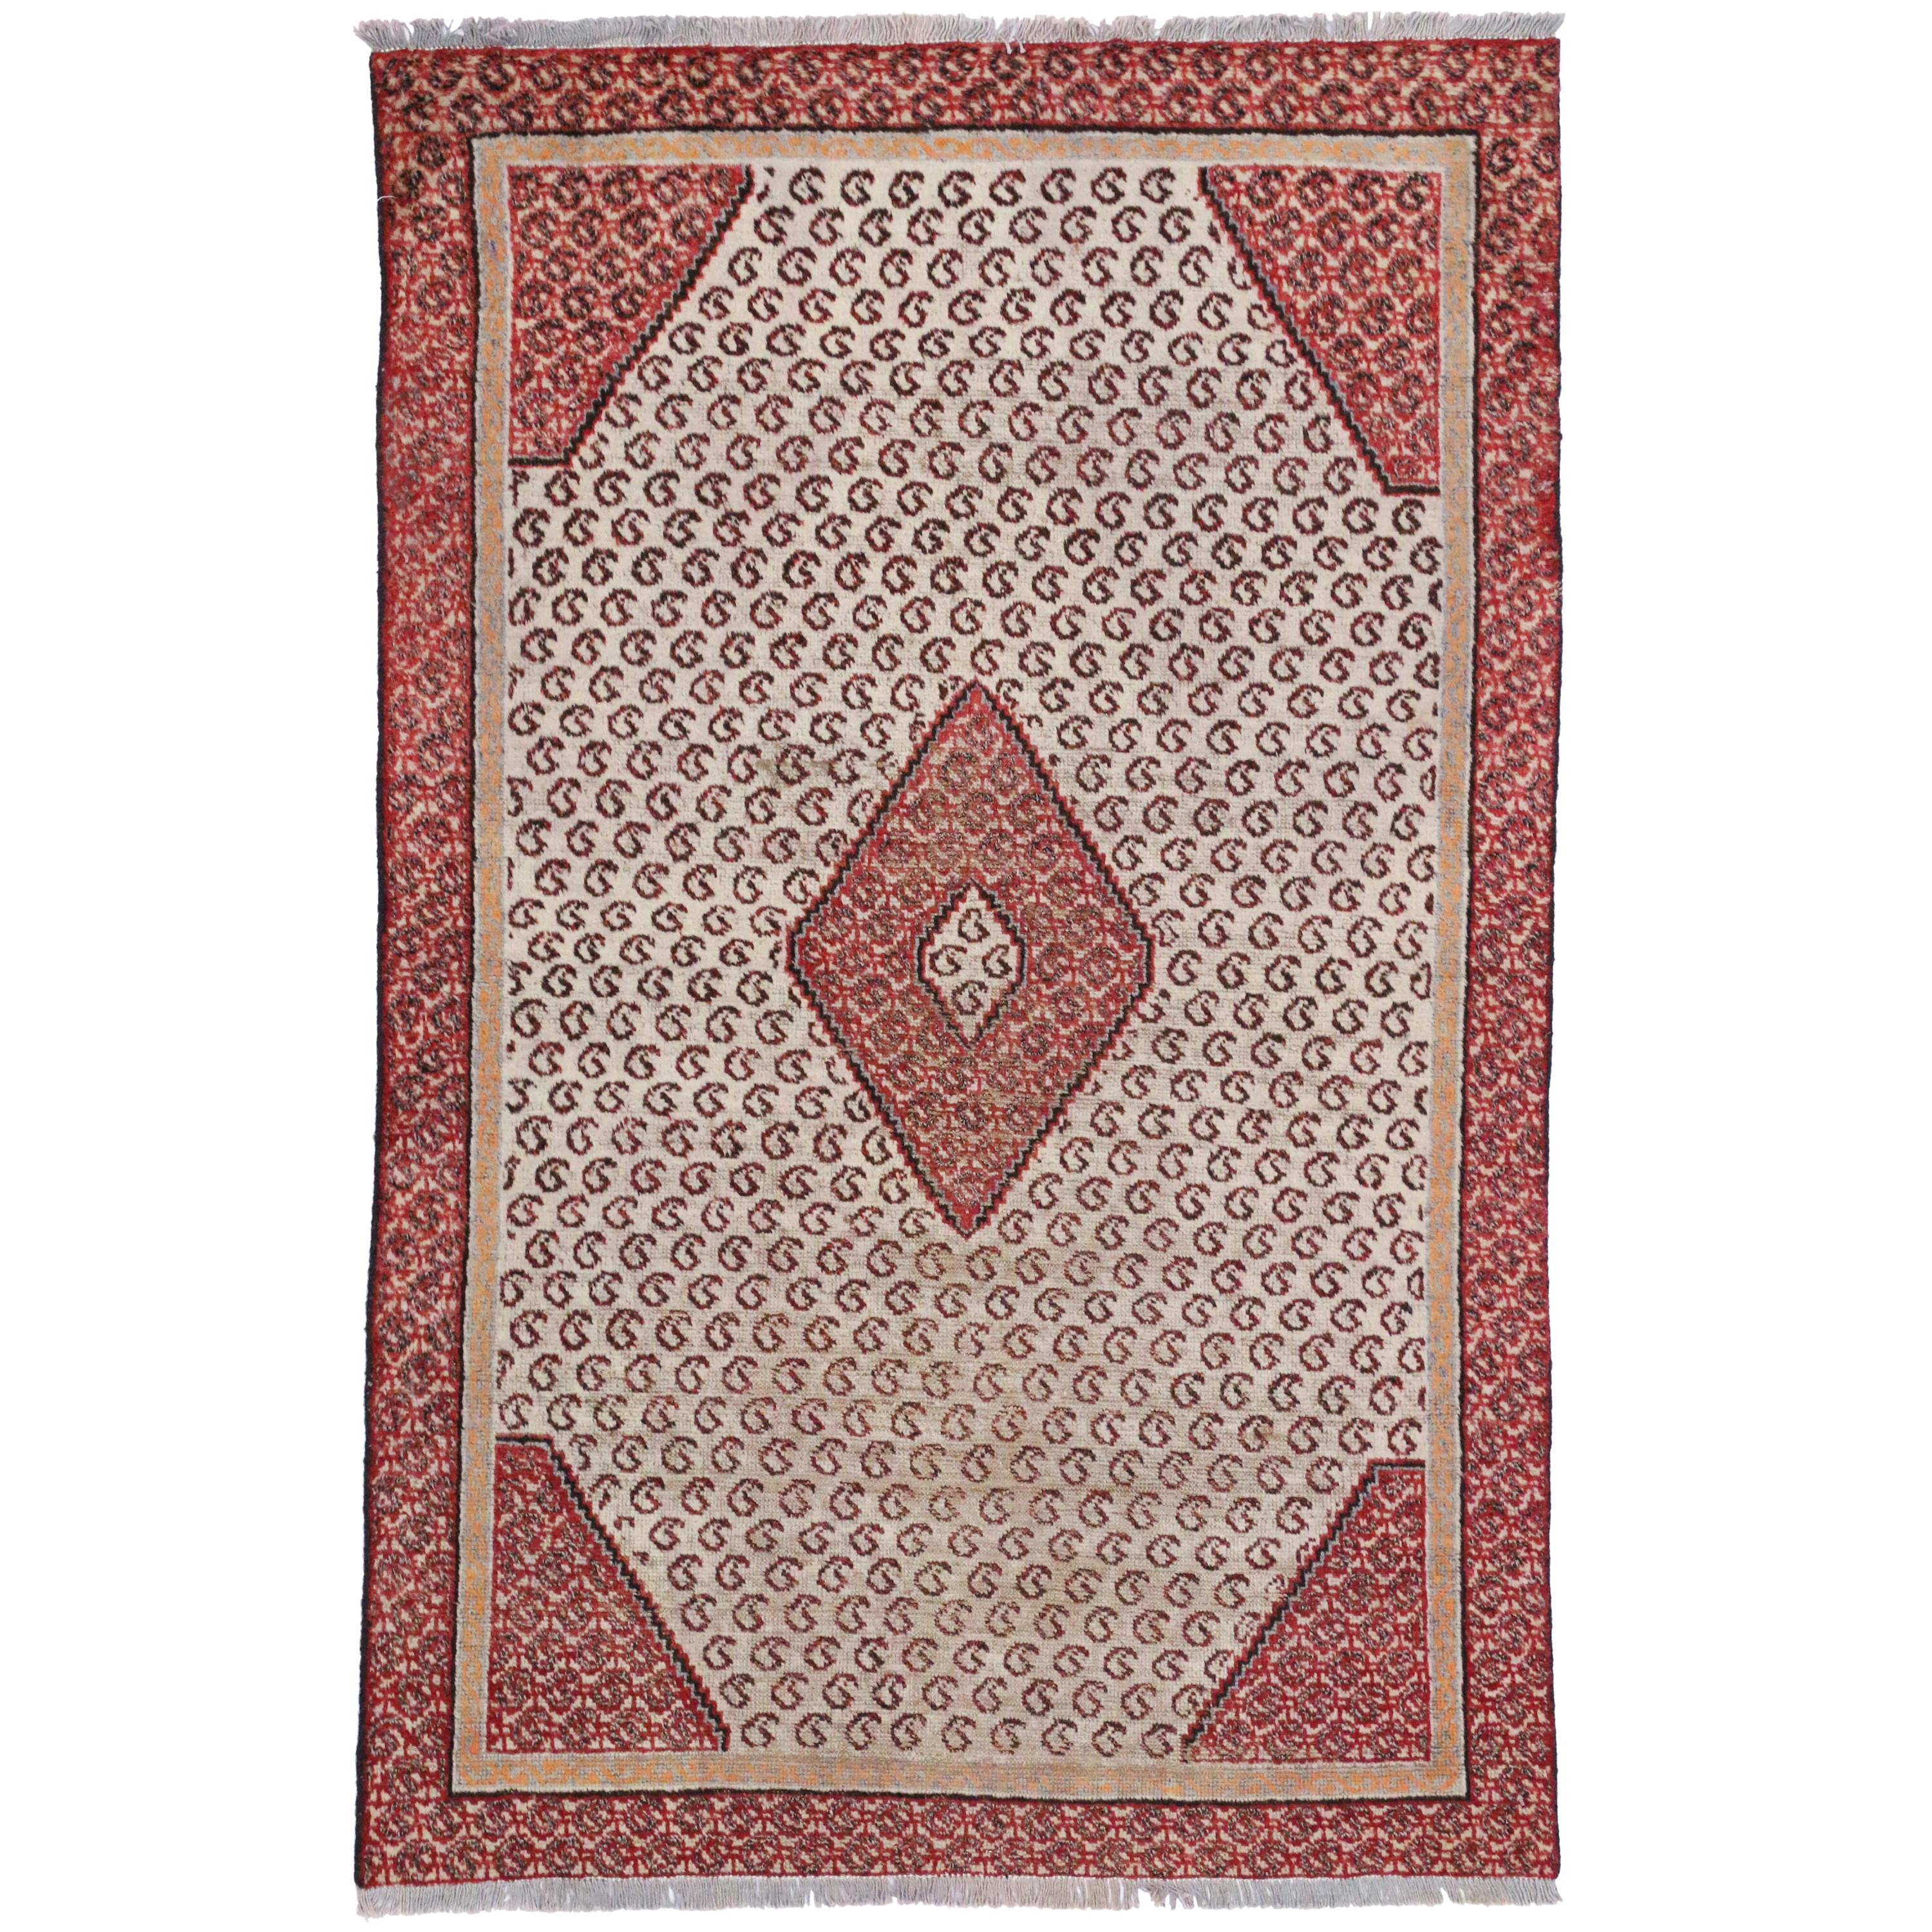 Vintage Persian Hamadan Rug with All-Over Boteh